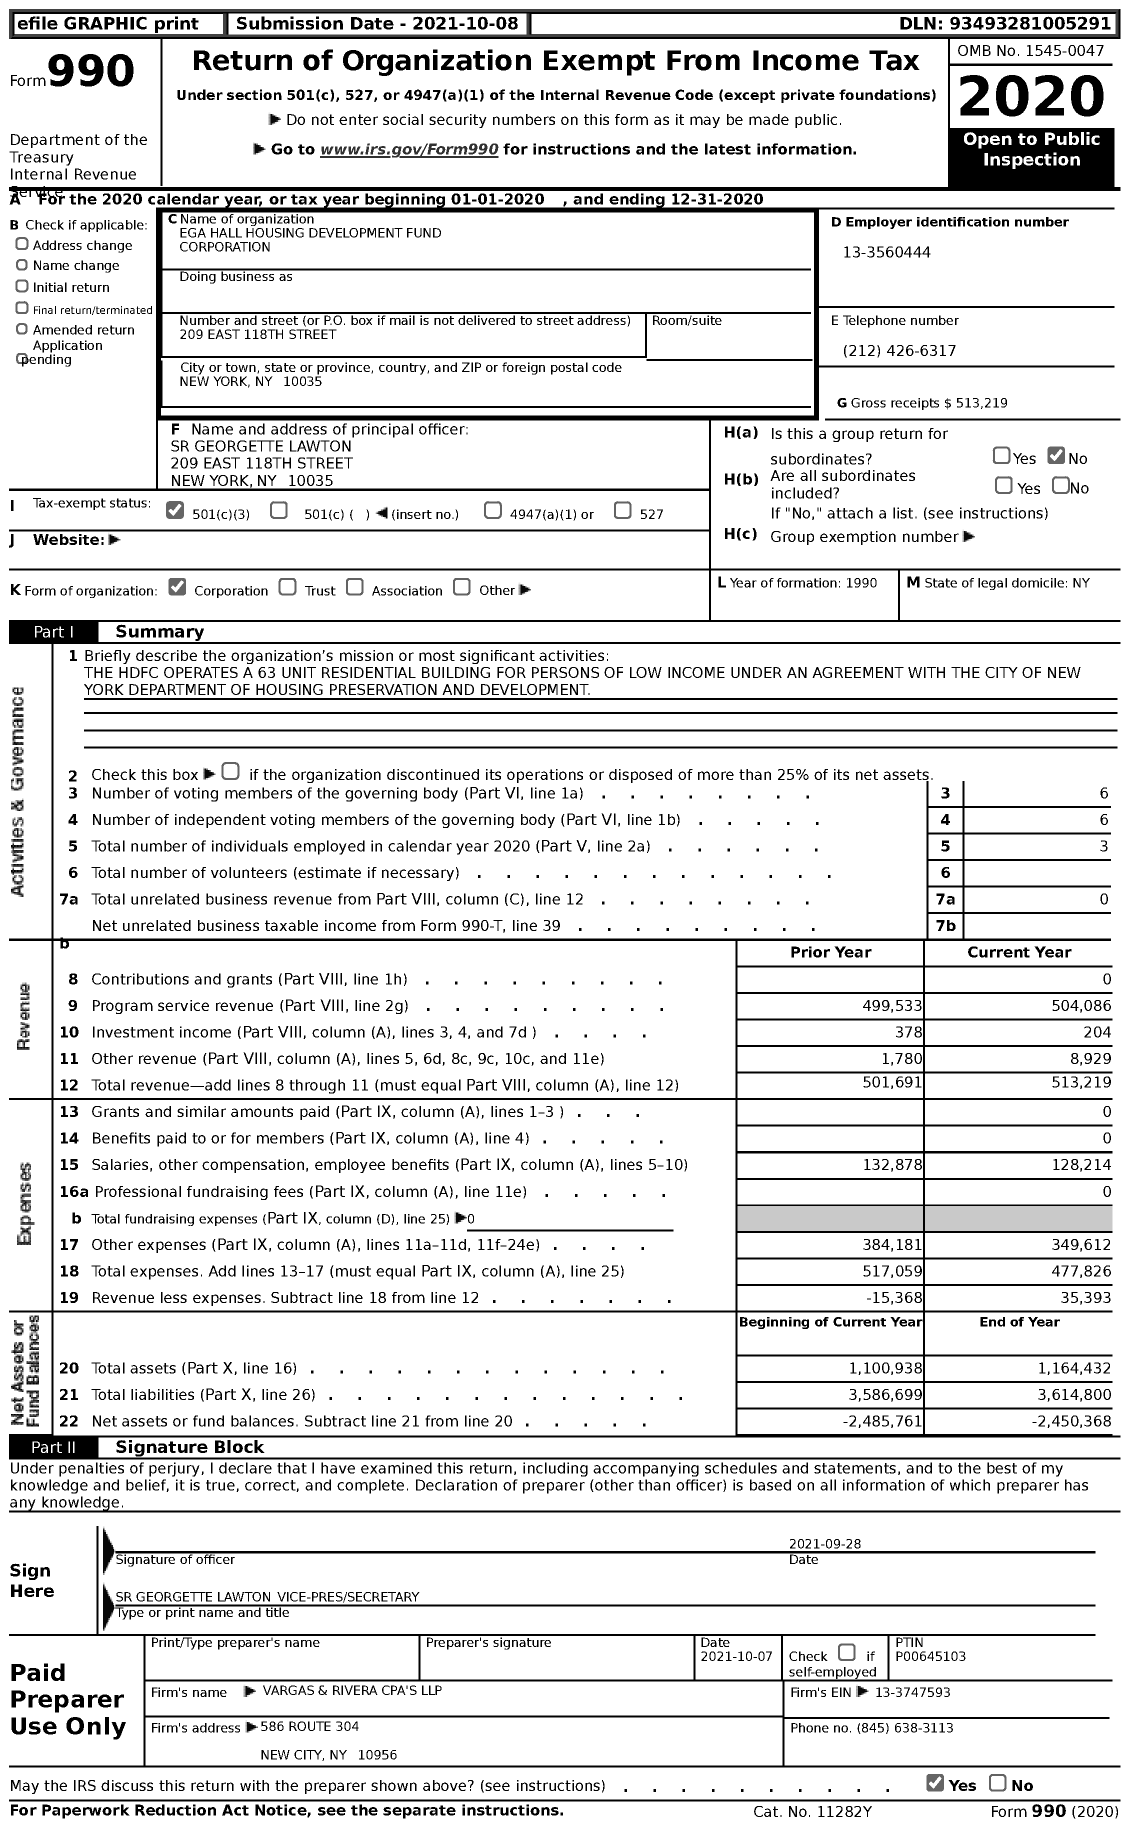 Image of first page of 2020 Form 990 for Ega Hall Housing Development Fund Corporation